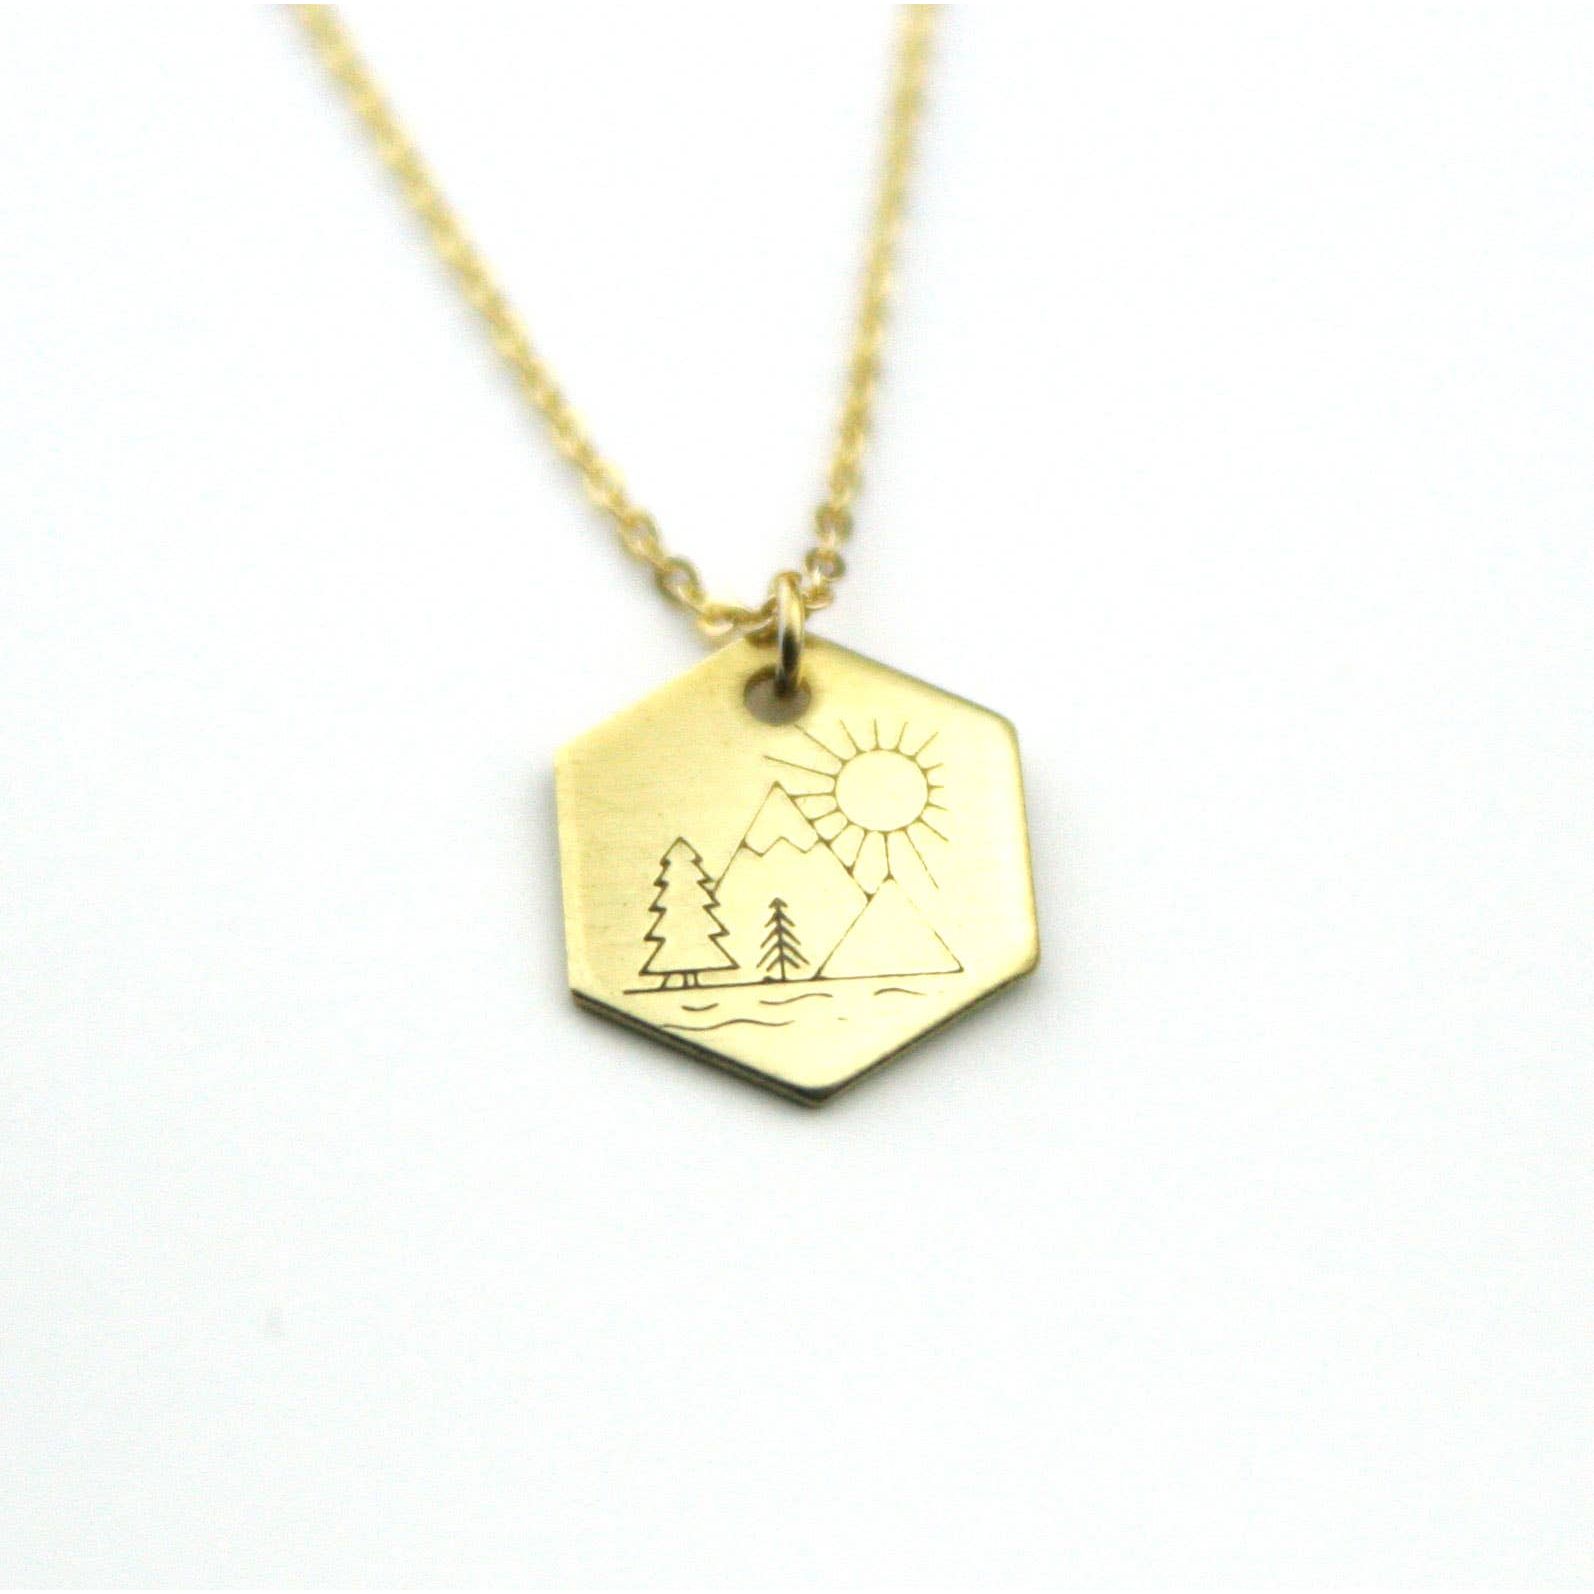  Great Outdoors Necklace